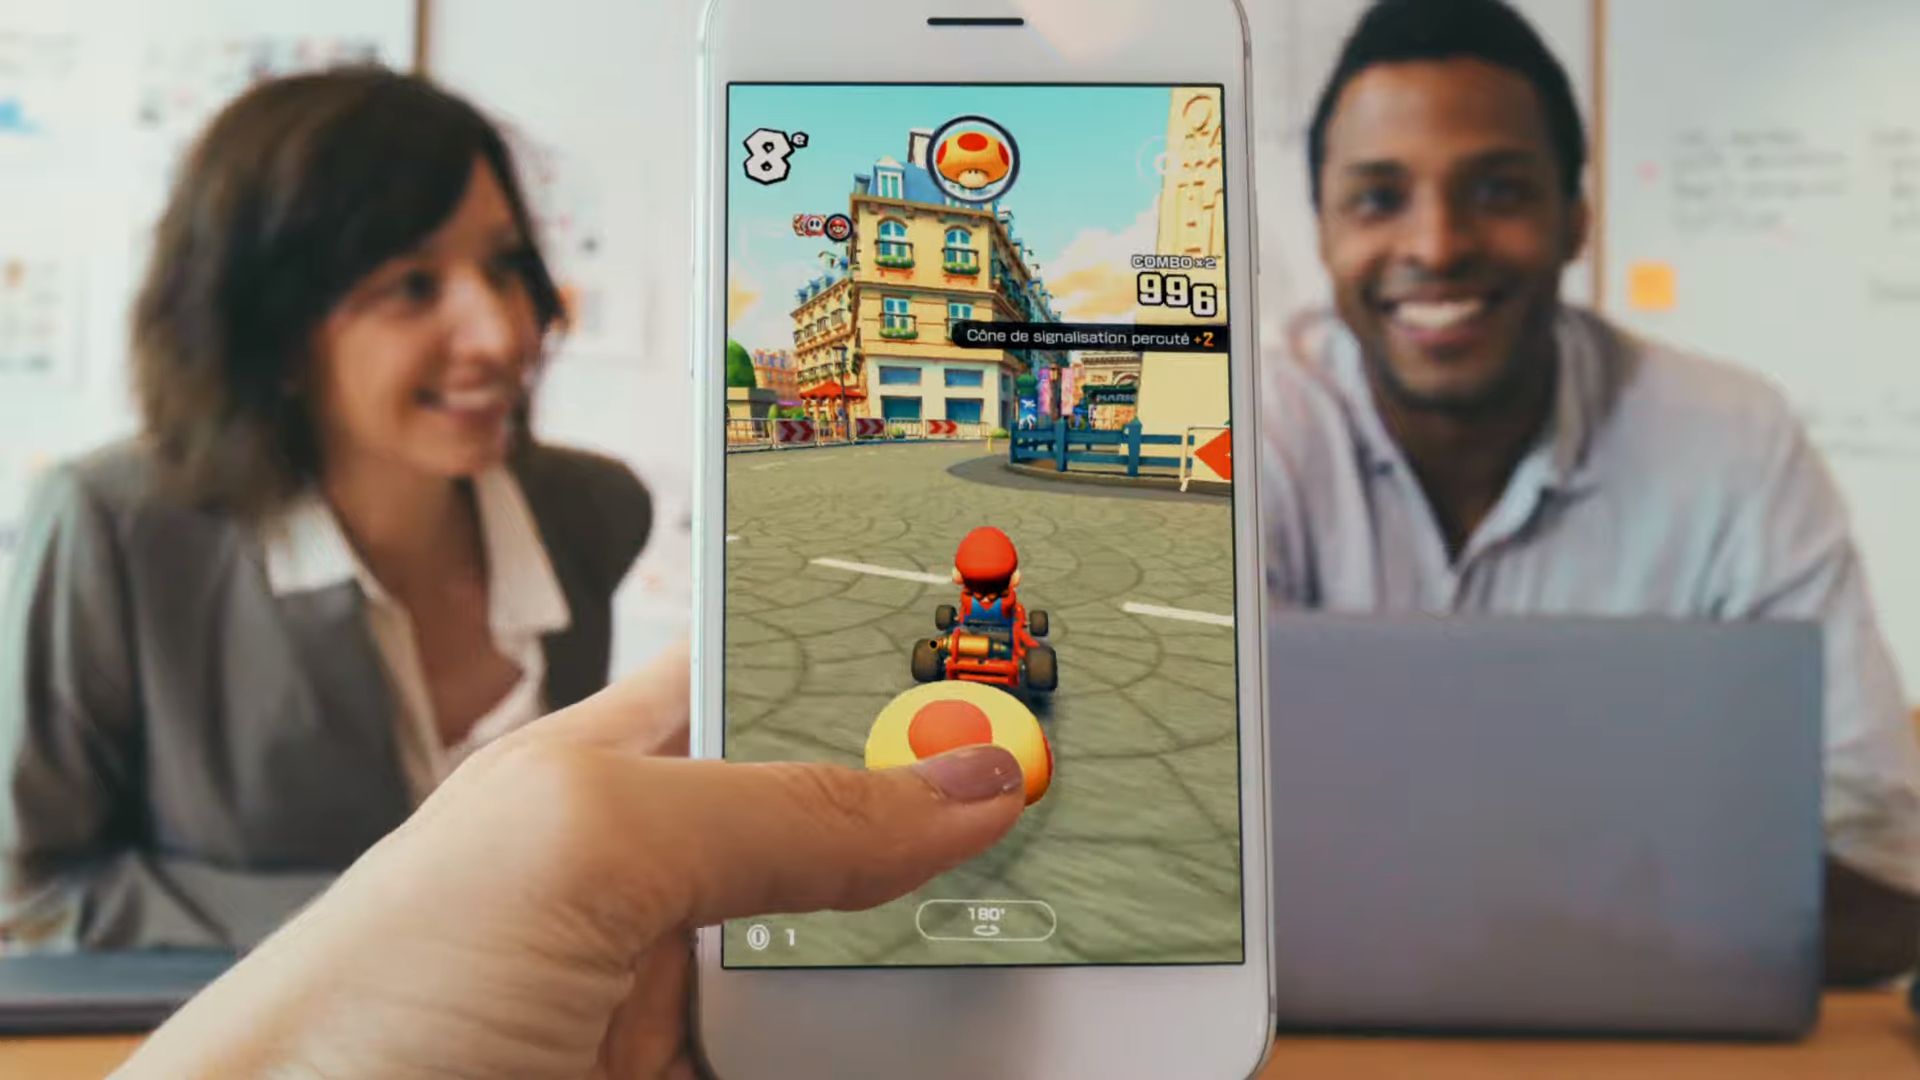 Two Big Warnings About 'Mario Kart Tour' On iOS And Android